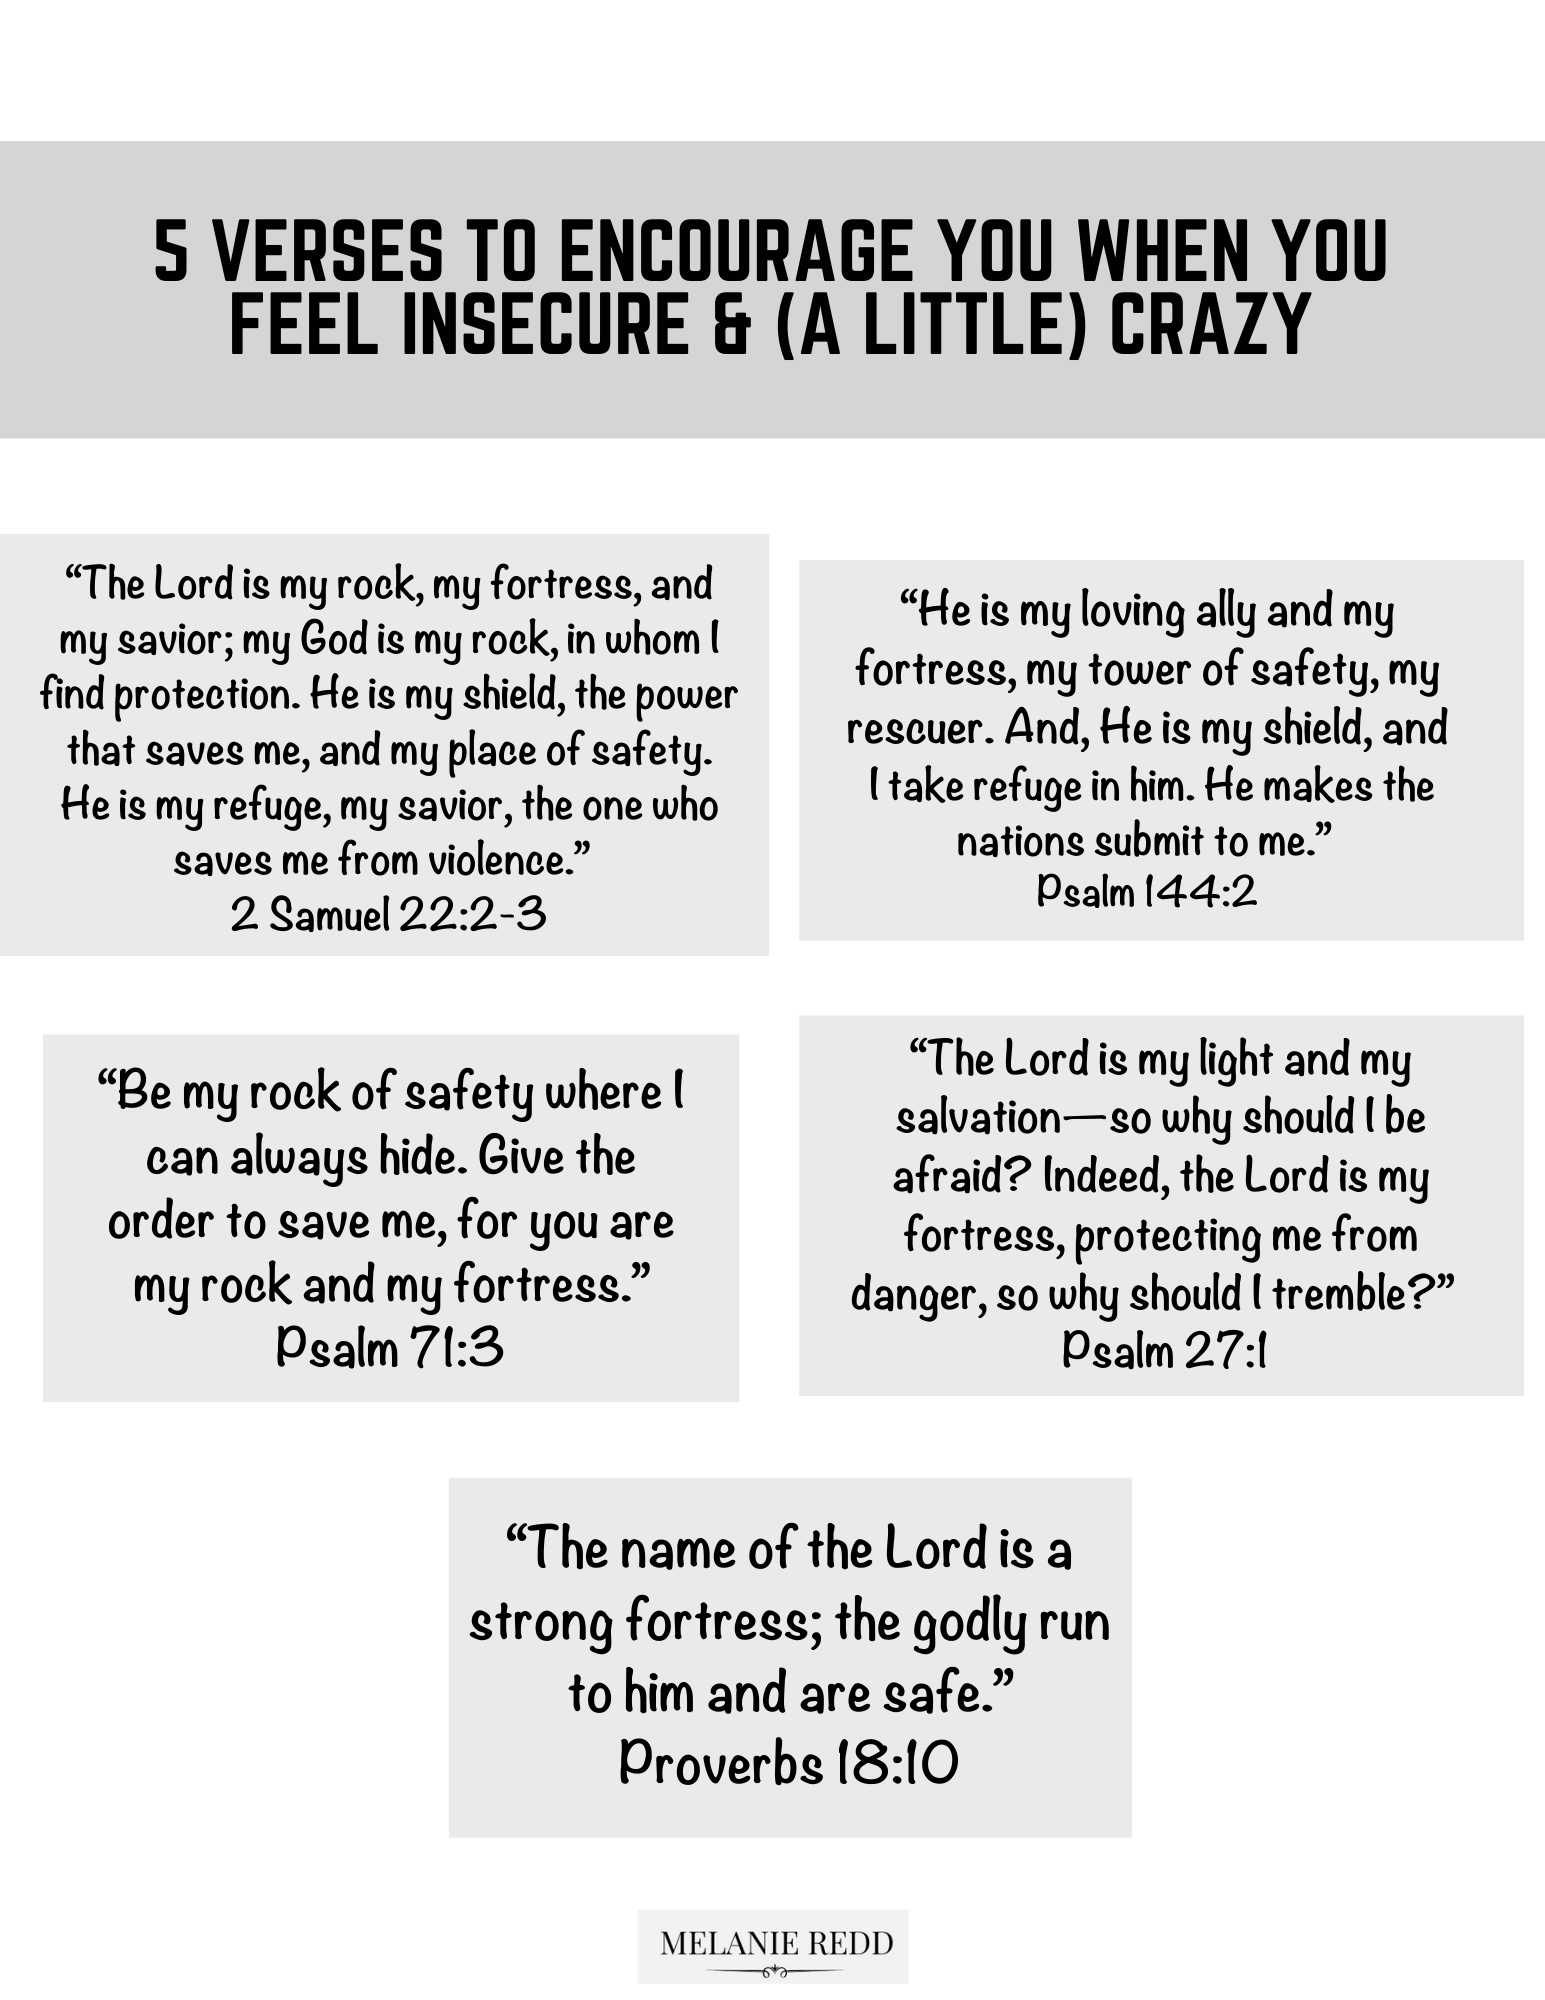 Things are a bit WILD in our world right now... even at home. Here are 5 verses to encourage you when you feel insecure & uncertain.